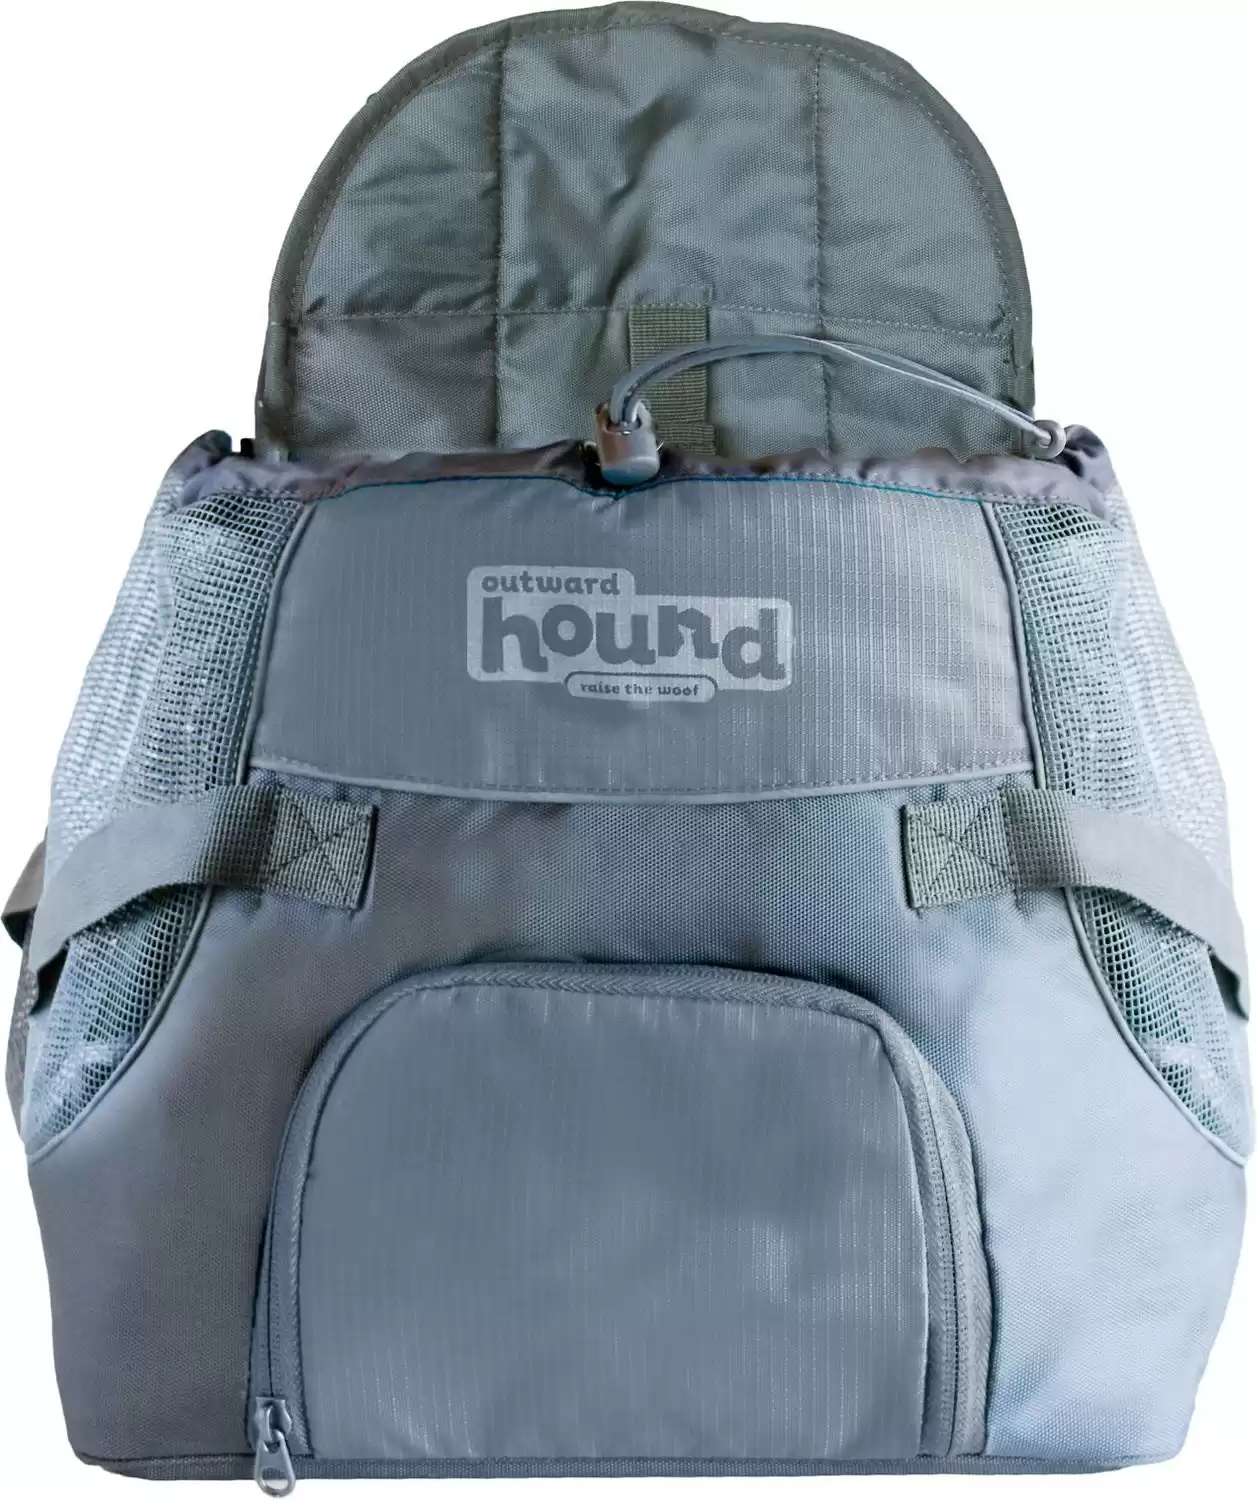 Outward Hound PoochPouch Dog Front Carrier